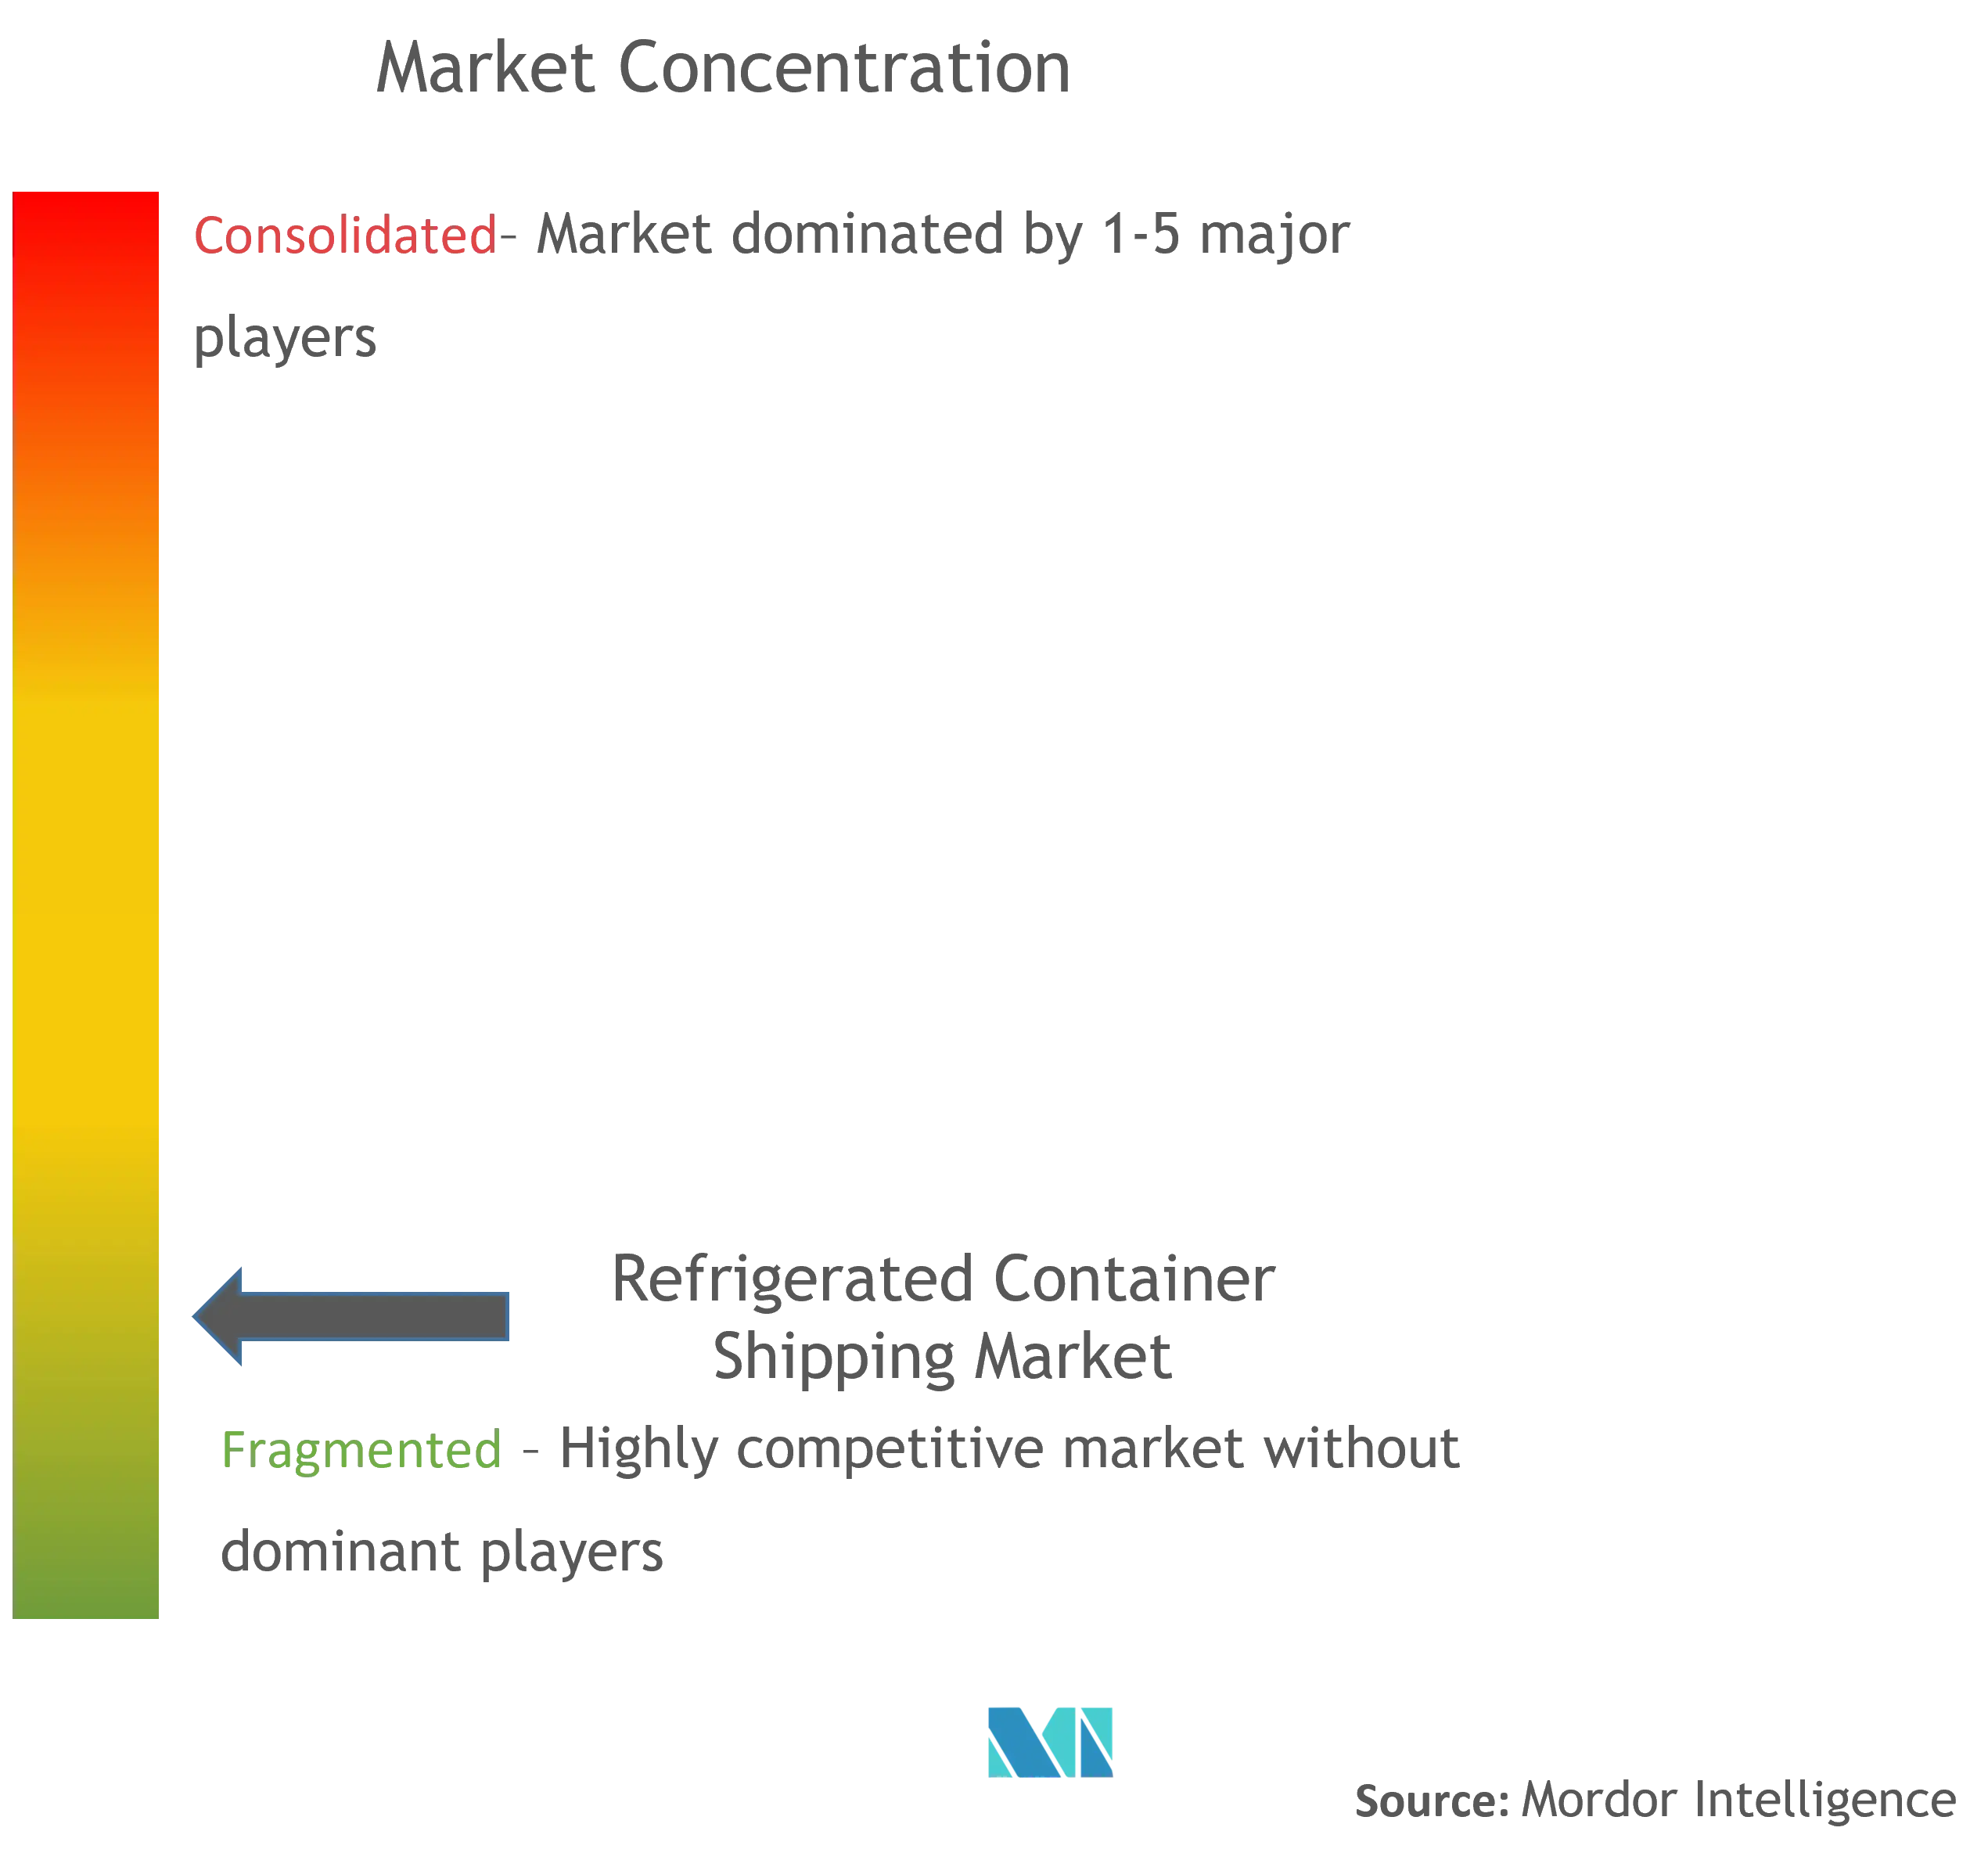 Refrigerated Container Shipping Market Concentration